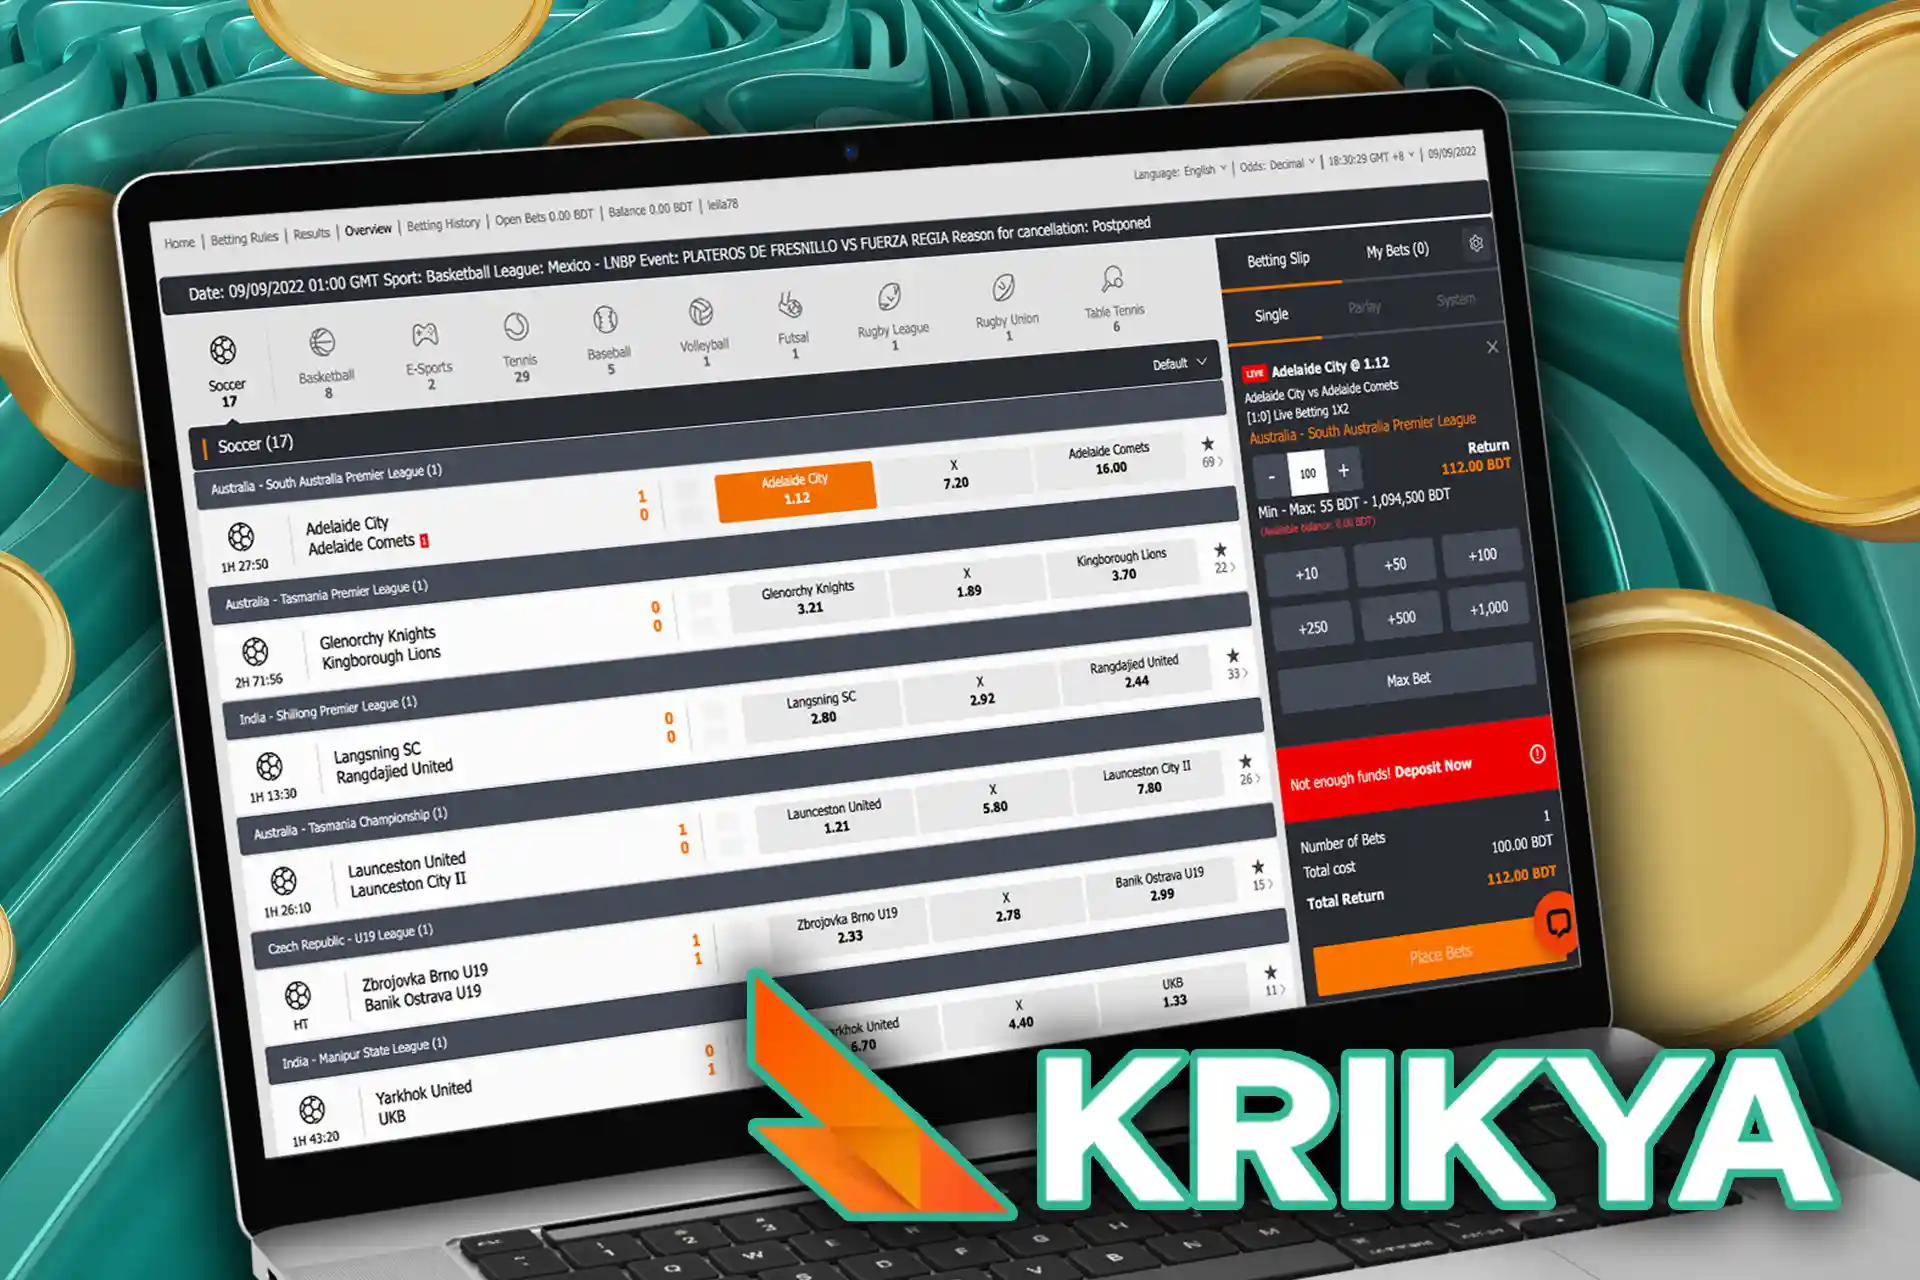 You can place bets during the match and watch the streaming at the Krikya website.